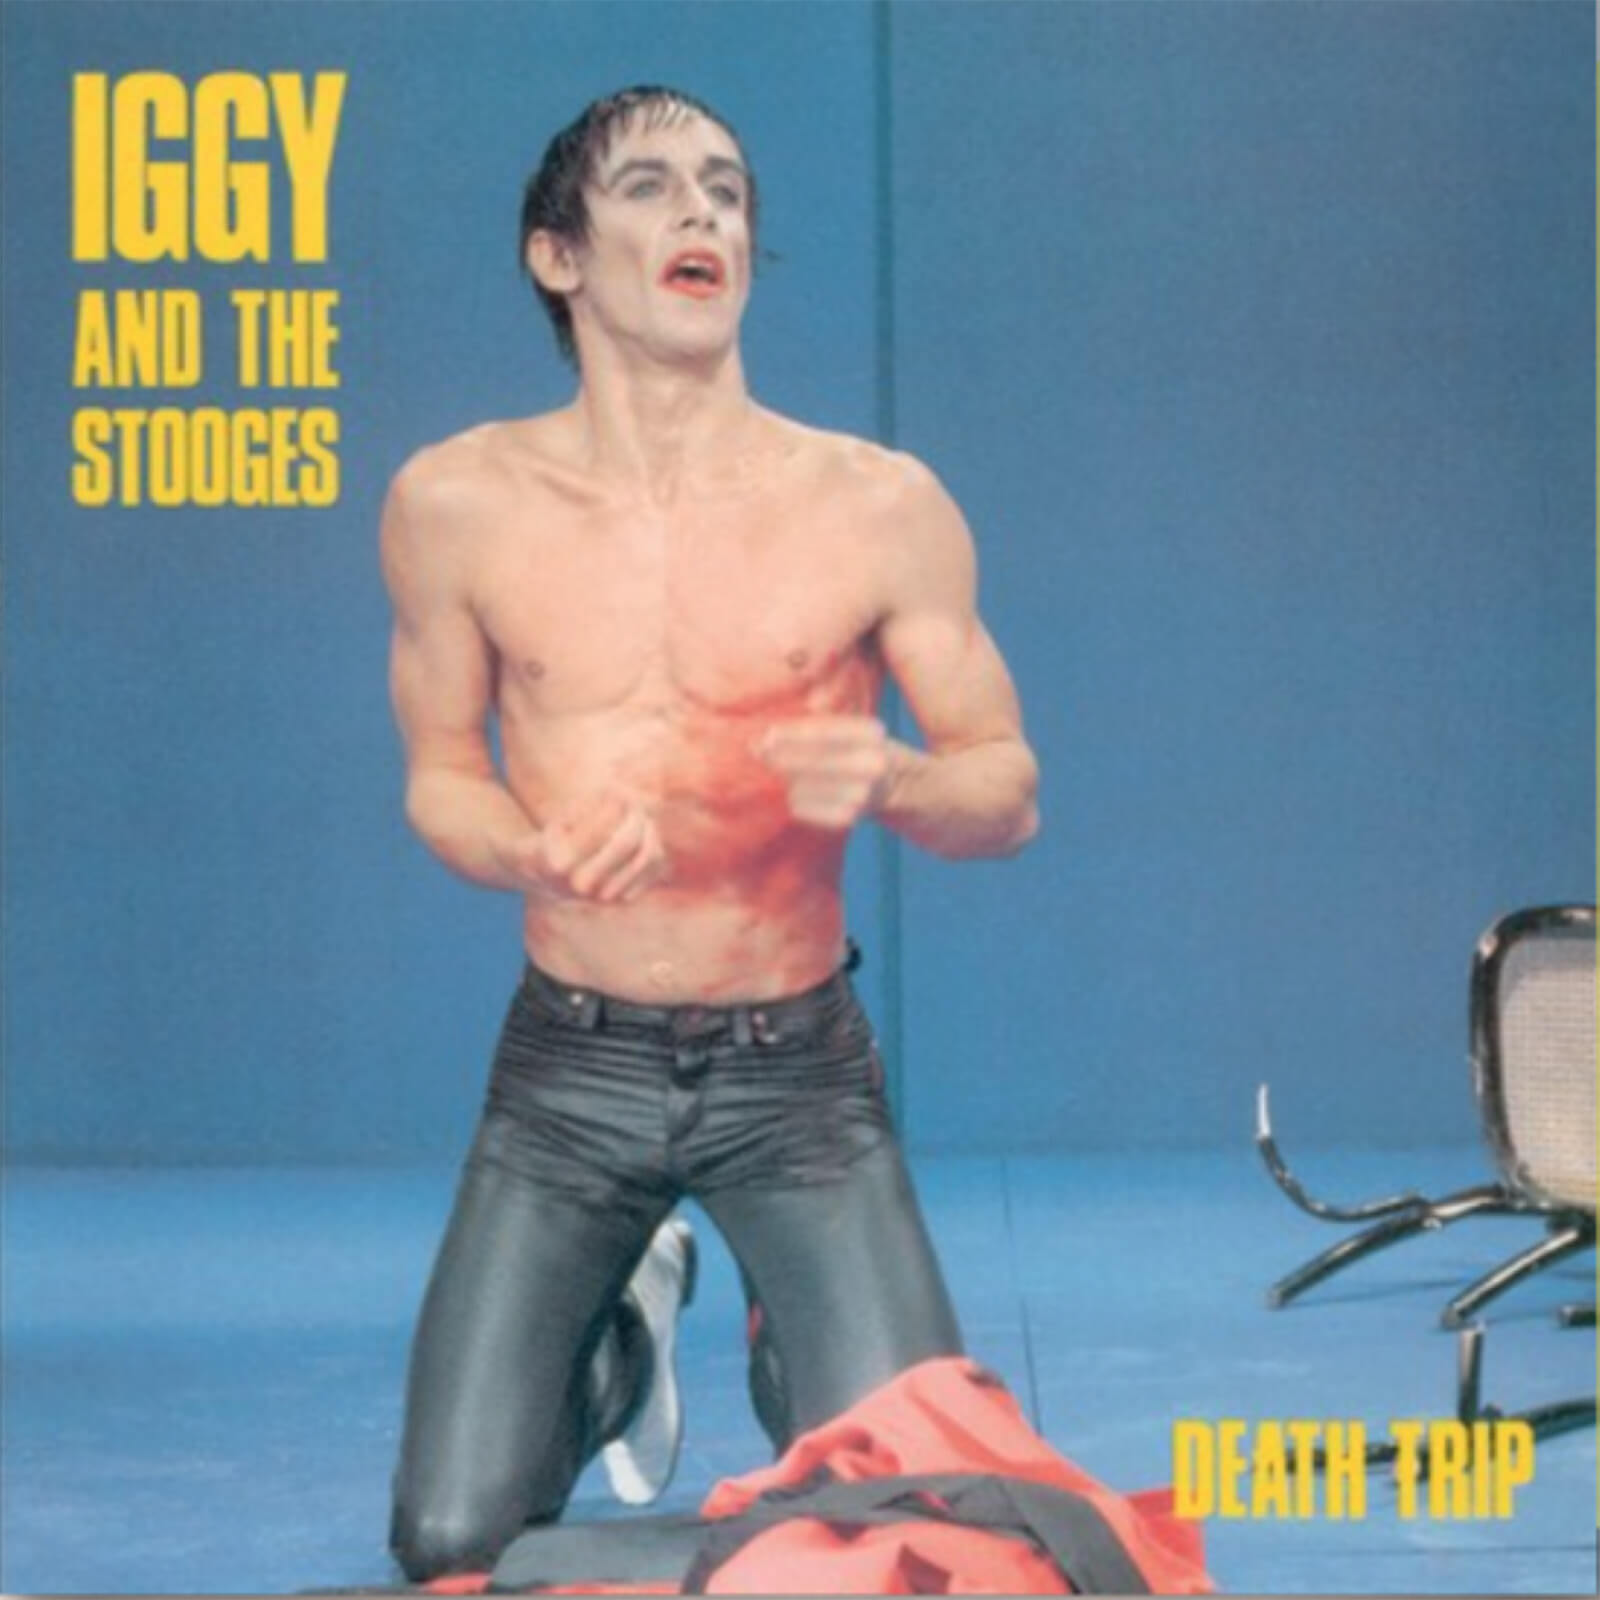 Diggers Factory - Iggy and the stooges - death trip lp (yellow)